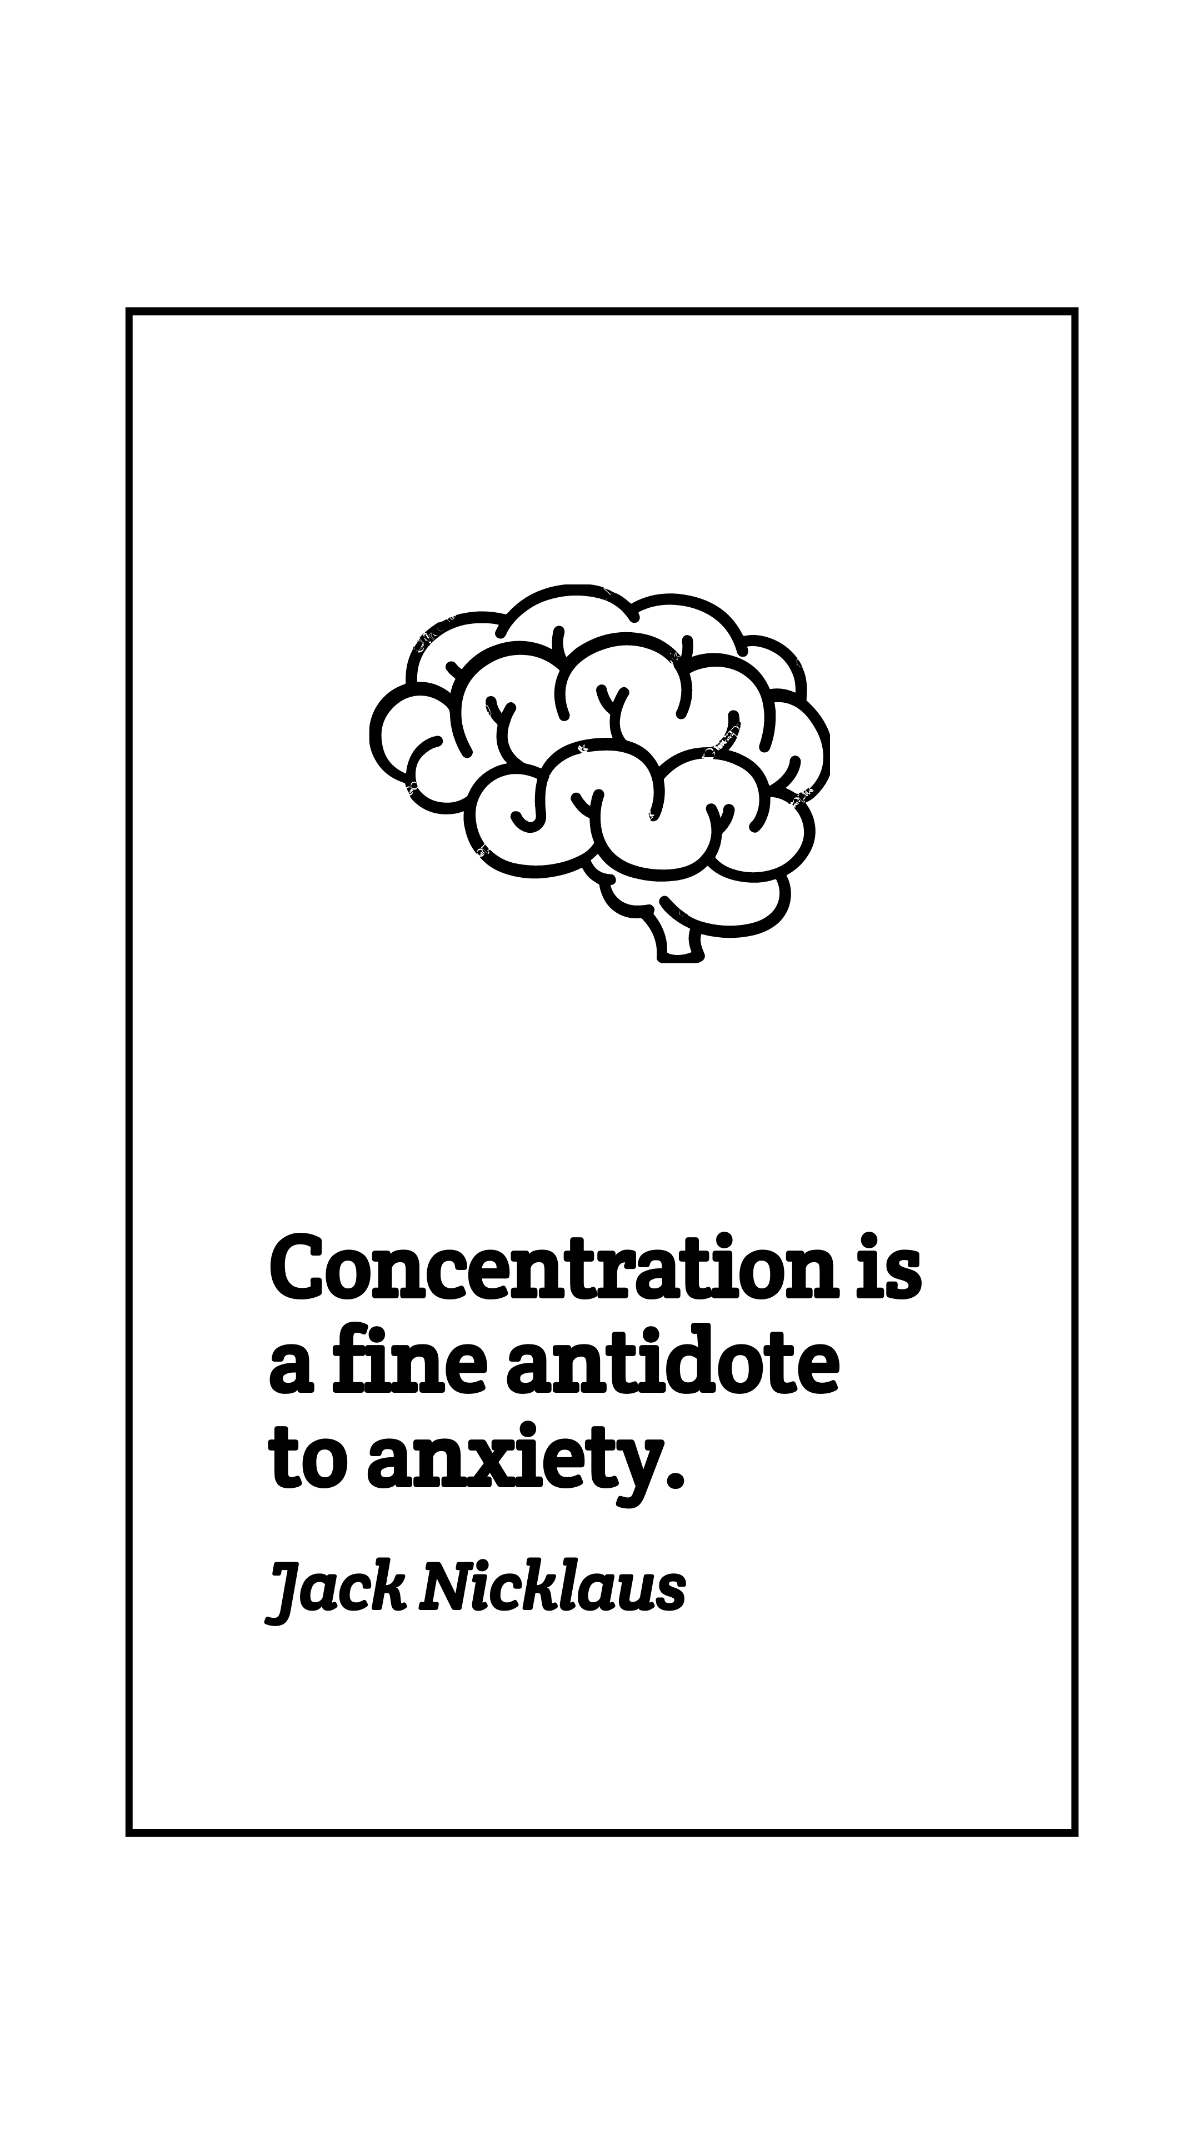 Jack Nicklaus - Concentration is a fine antidote to anxiety.